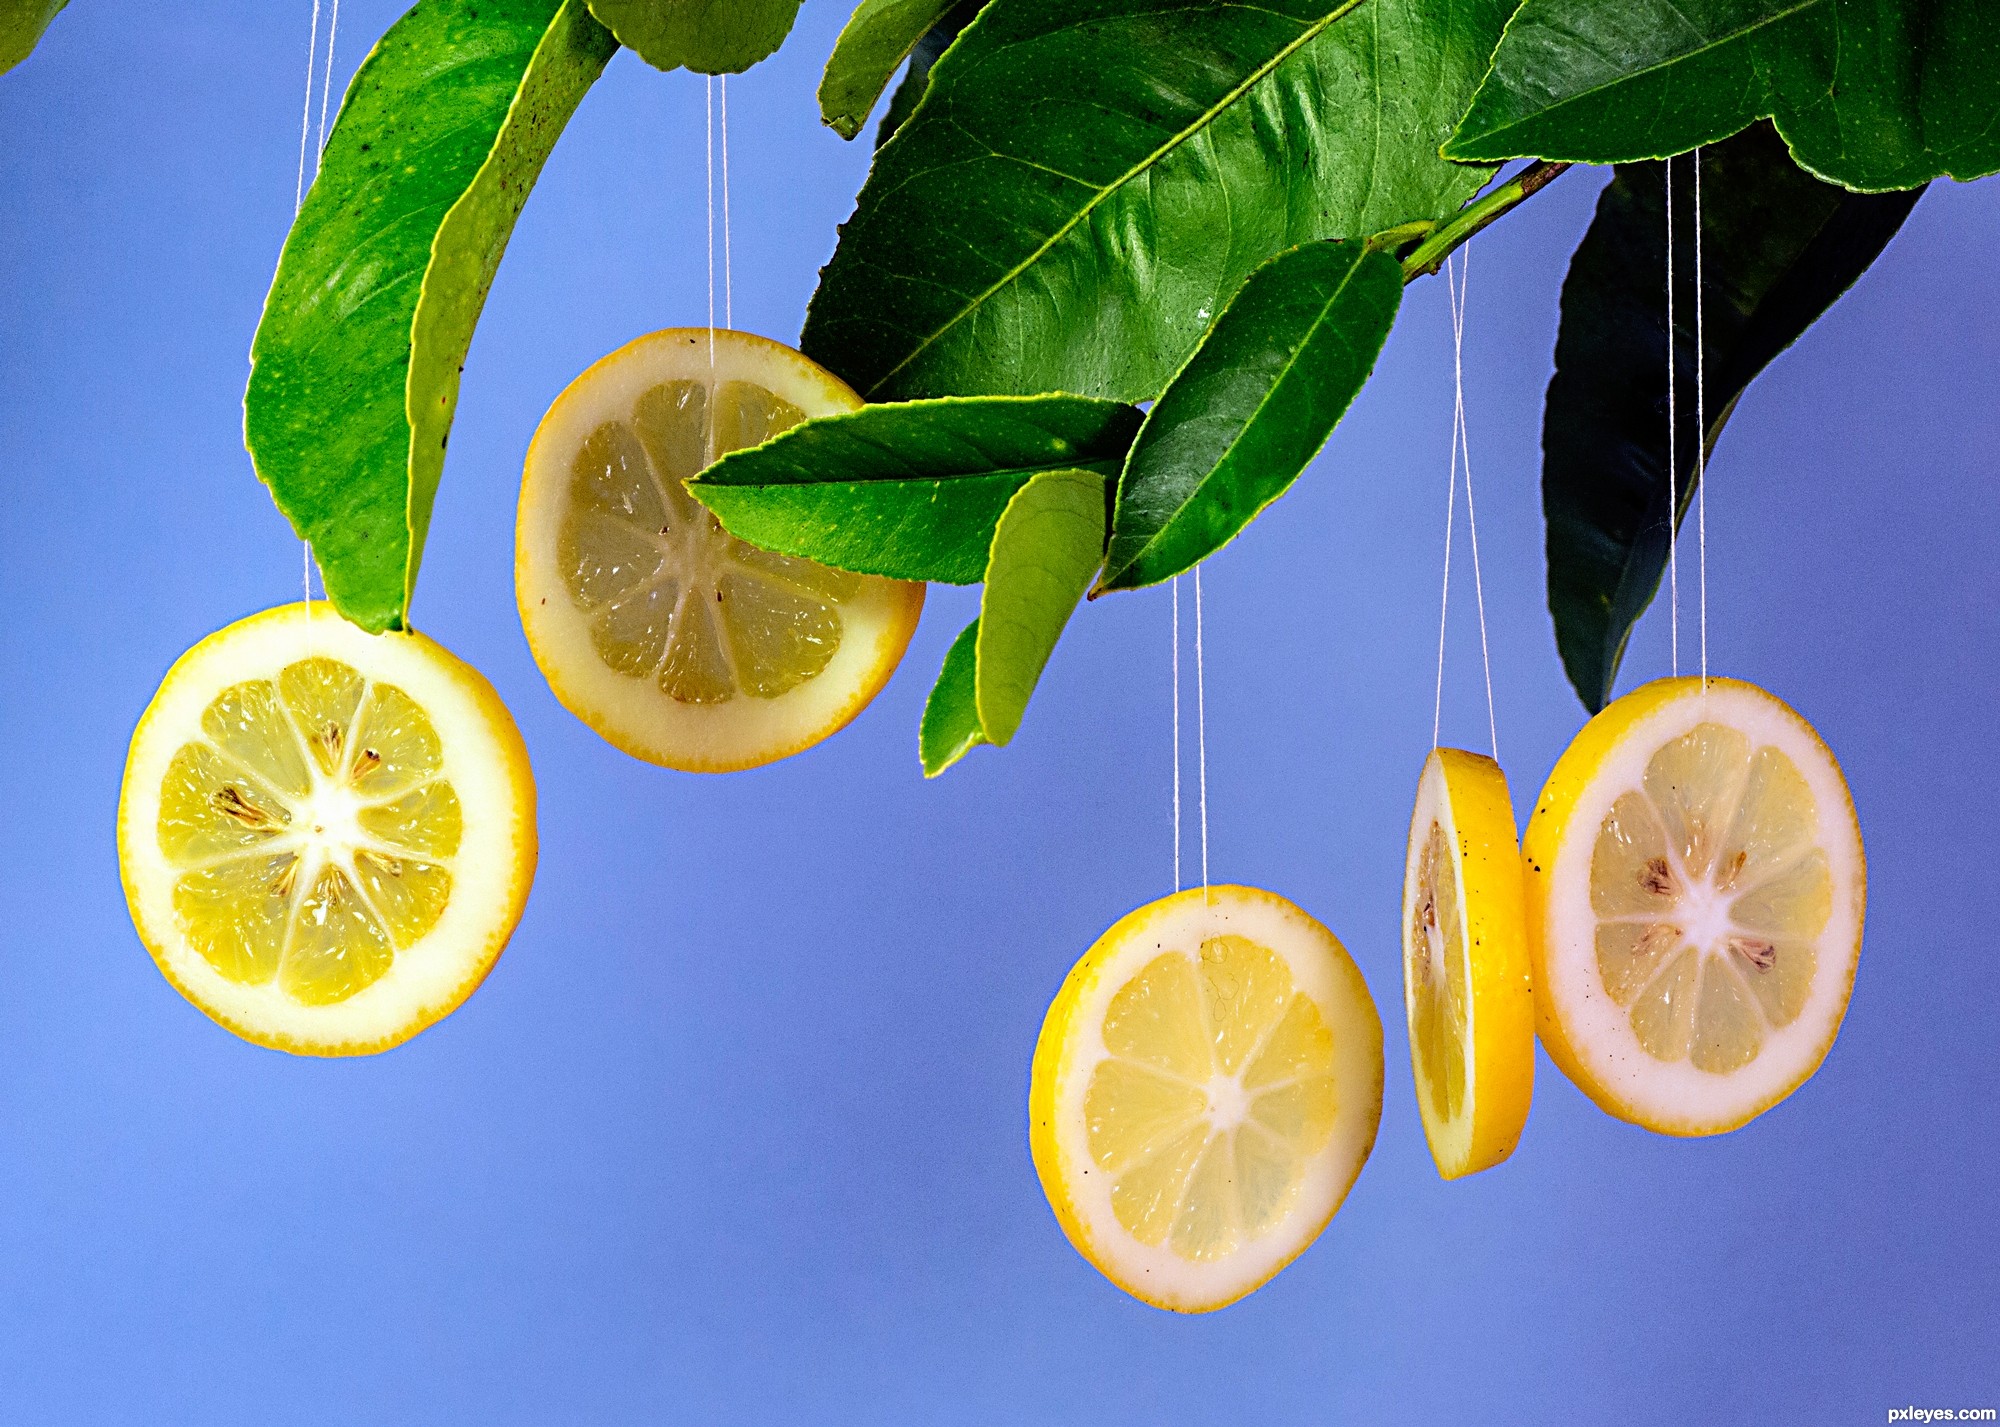 Lemon Tree Picture By Friiskiwi For Citrus Fruit Photography Contest Pxleyes Com Add colourful, fresh lemon art to really brighten up your kitchen! pxleyes com